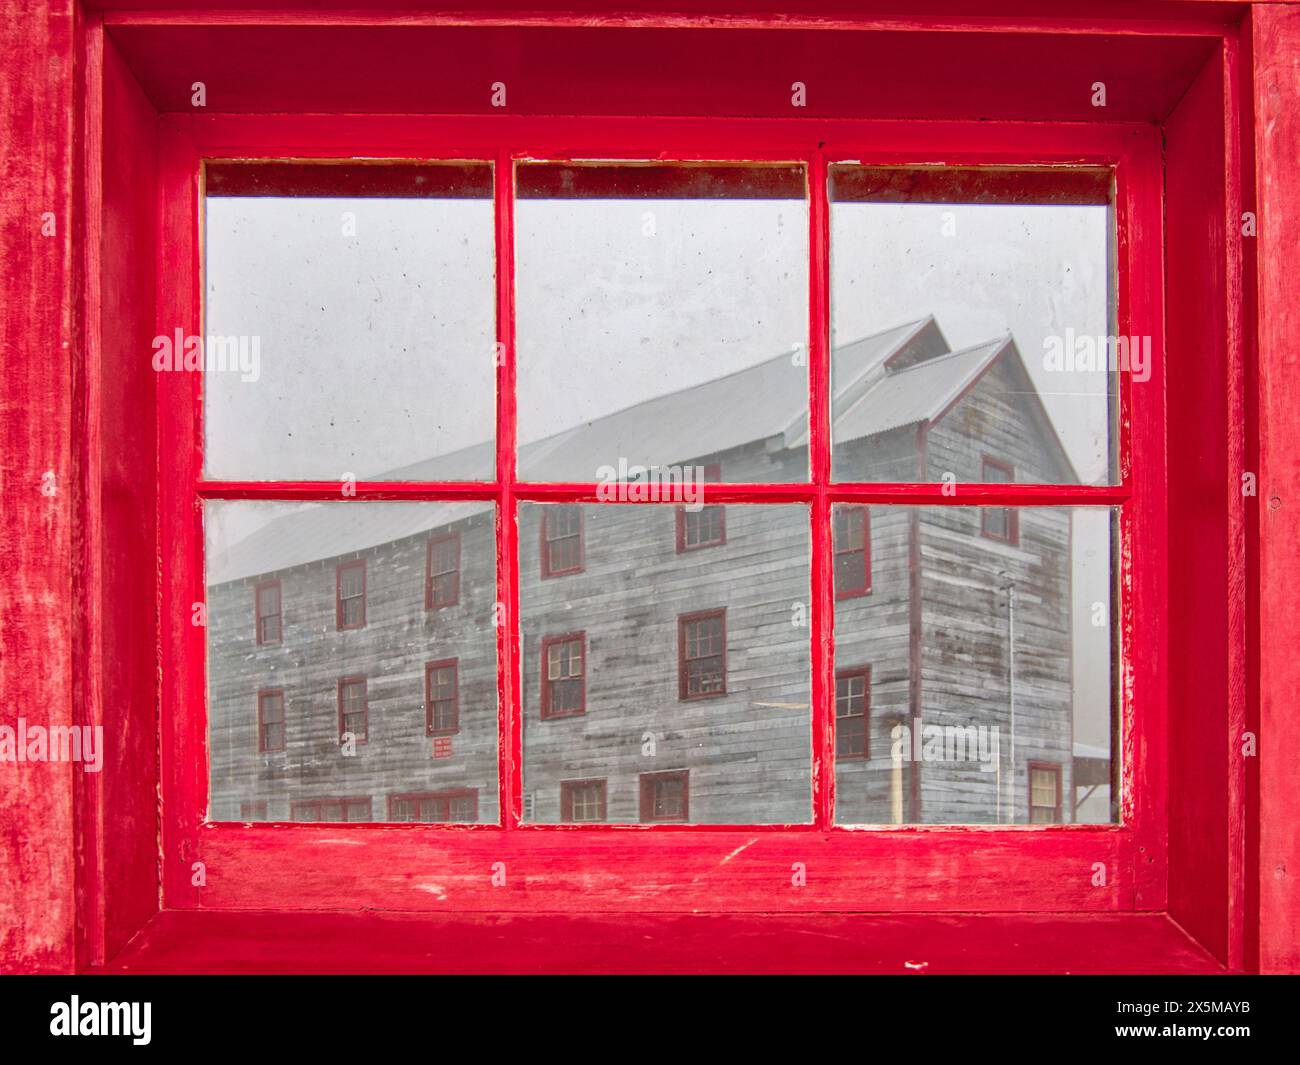 USA, Alaska. Window reflection of the No. 1 bunkhouse at the Independence Mine State Historical Park listed on the National Register of Historic Place Stock Photo